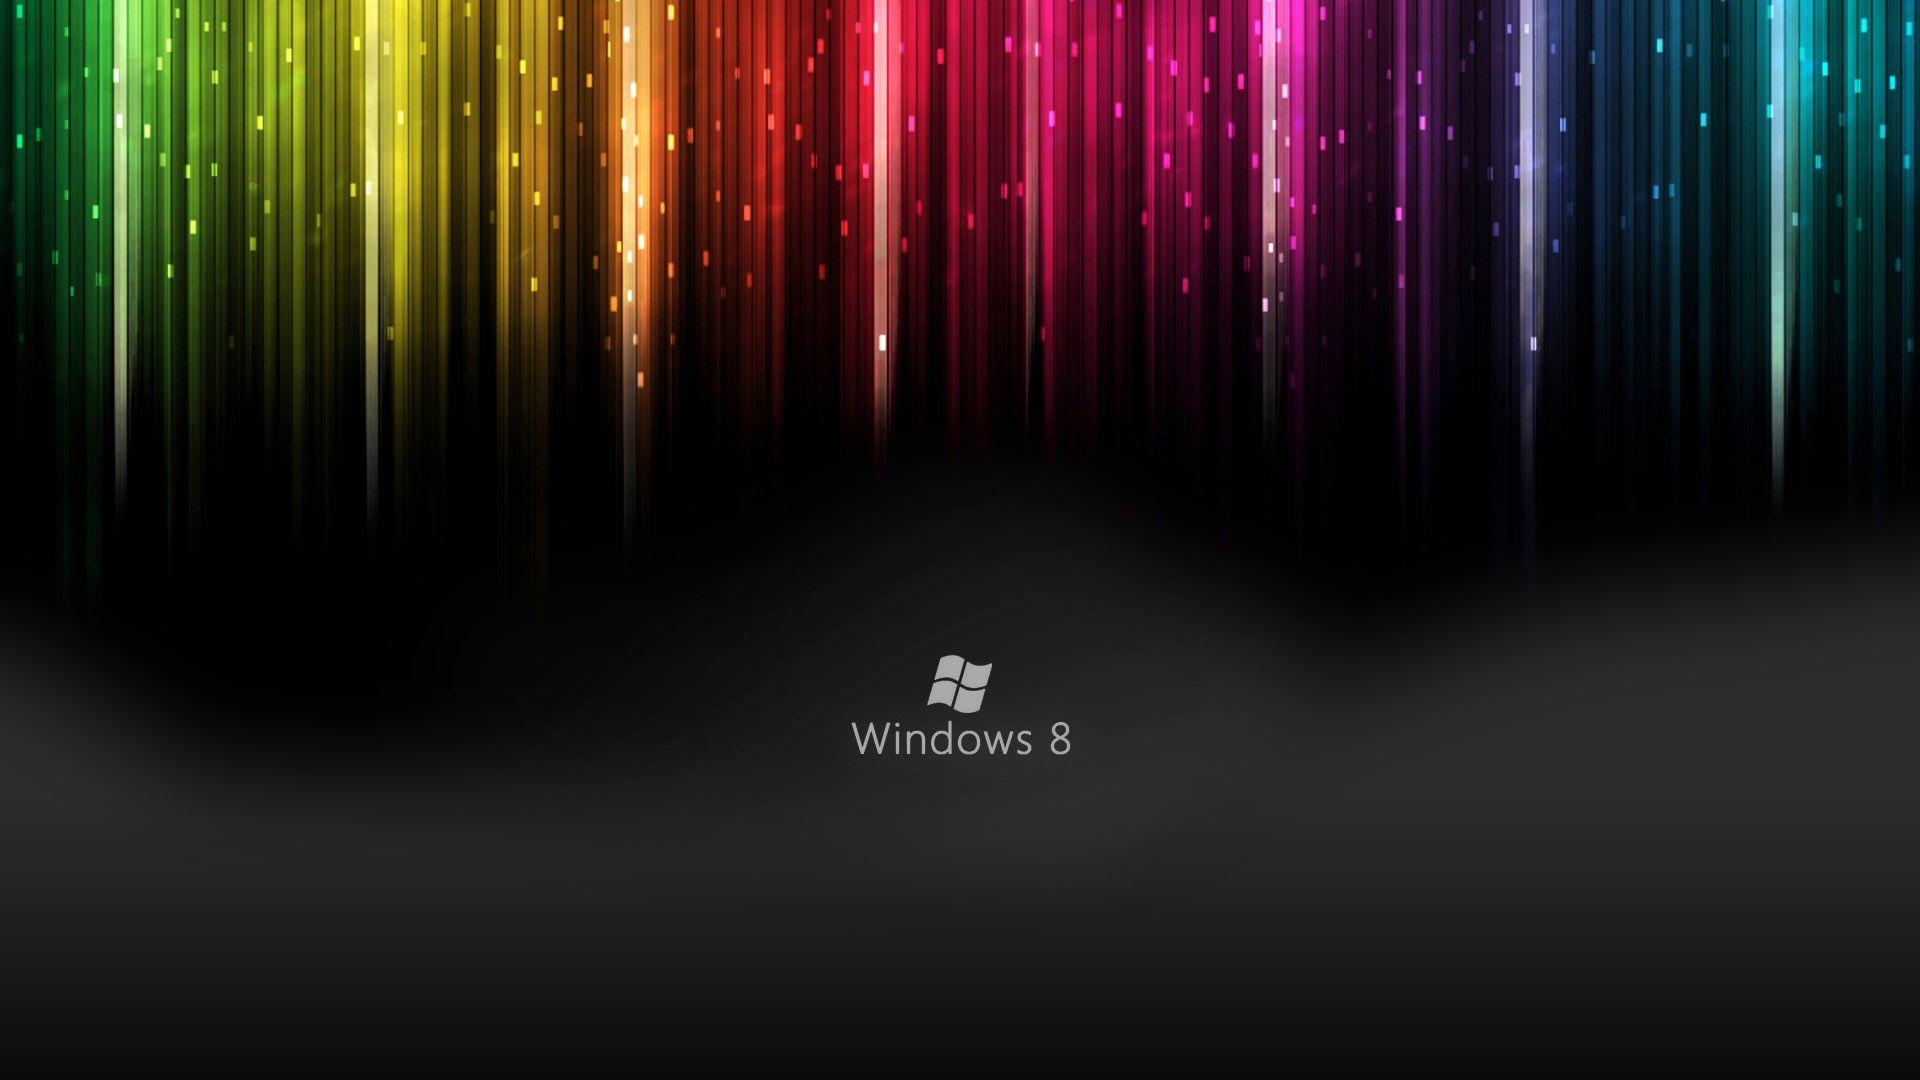 Windows 8 Wallpaper in HD For Free Download